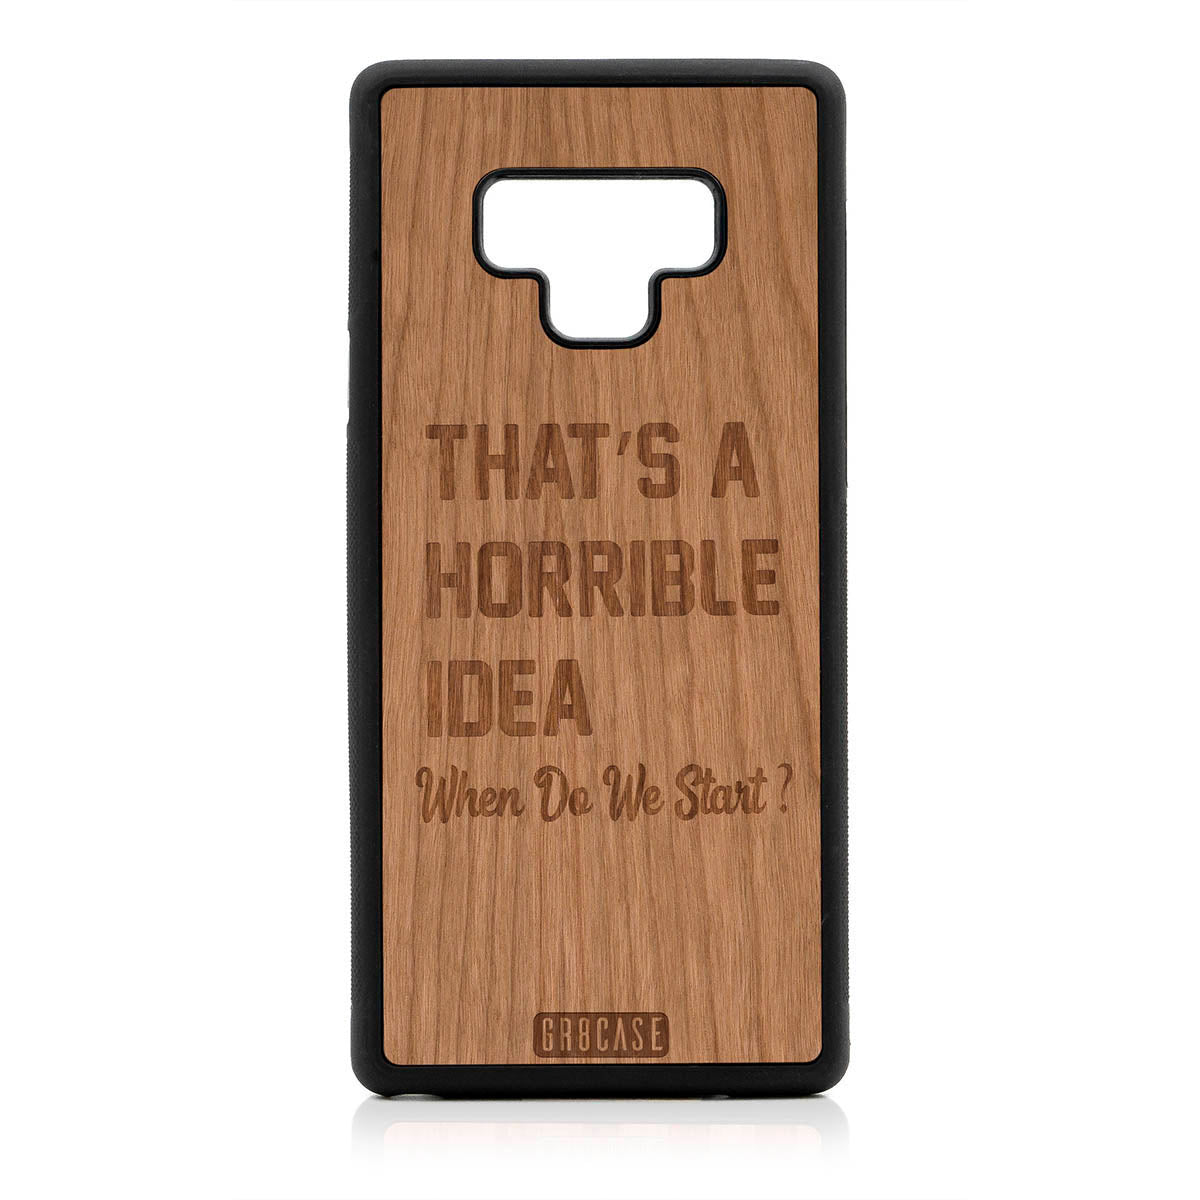 That's A Horrible Idea When Do We Start? Design Wood Case For Samsung Galaxy Note 9